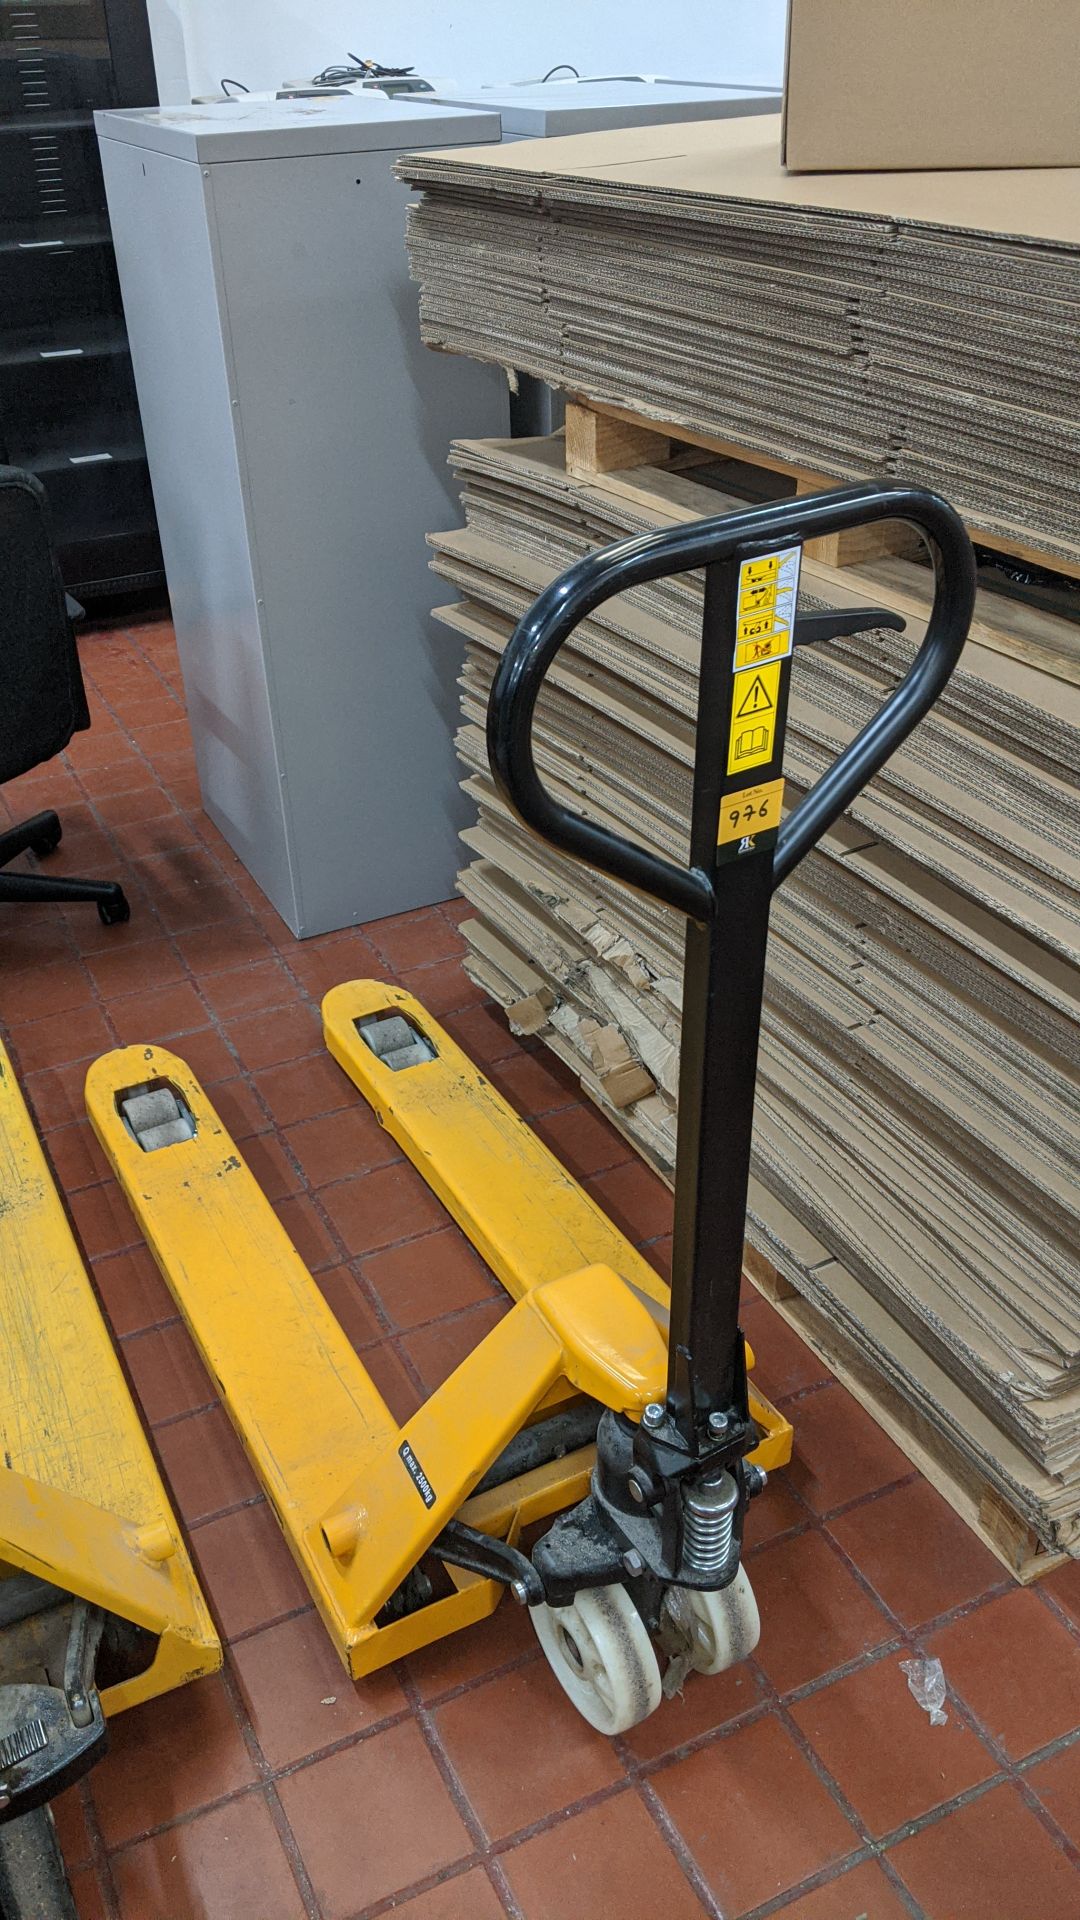 Euro pallet truck, 2500kg capacity. This is one of a large number of lots in this sale being sold - Image 2 of 5